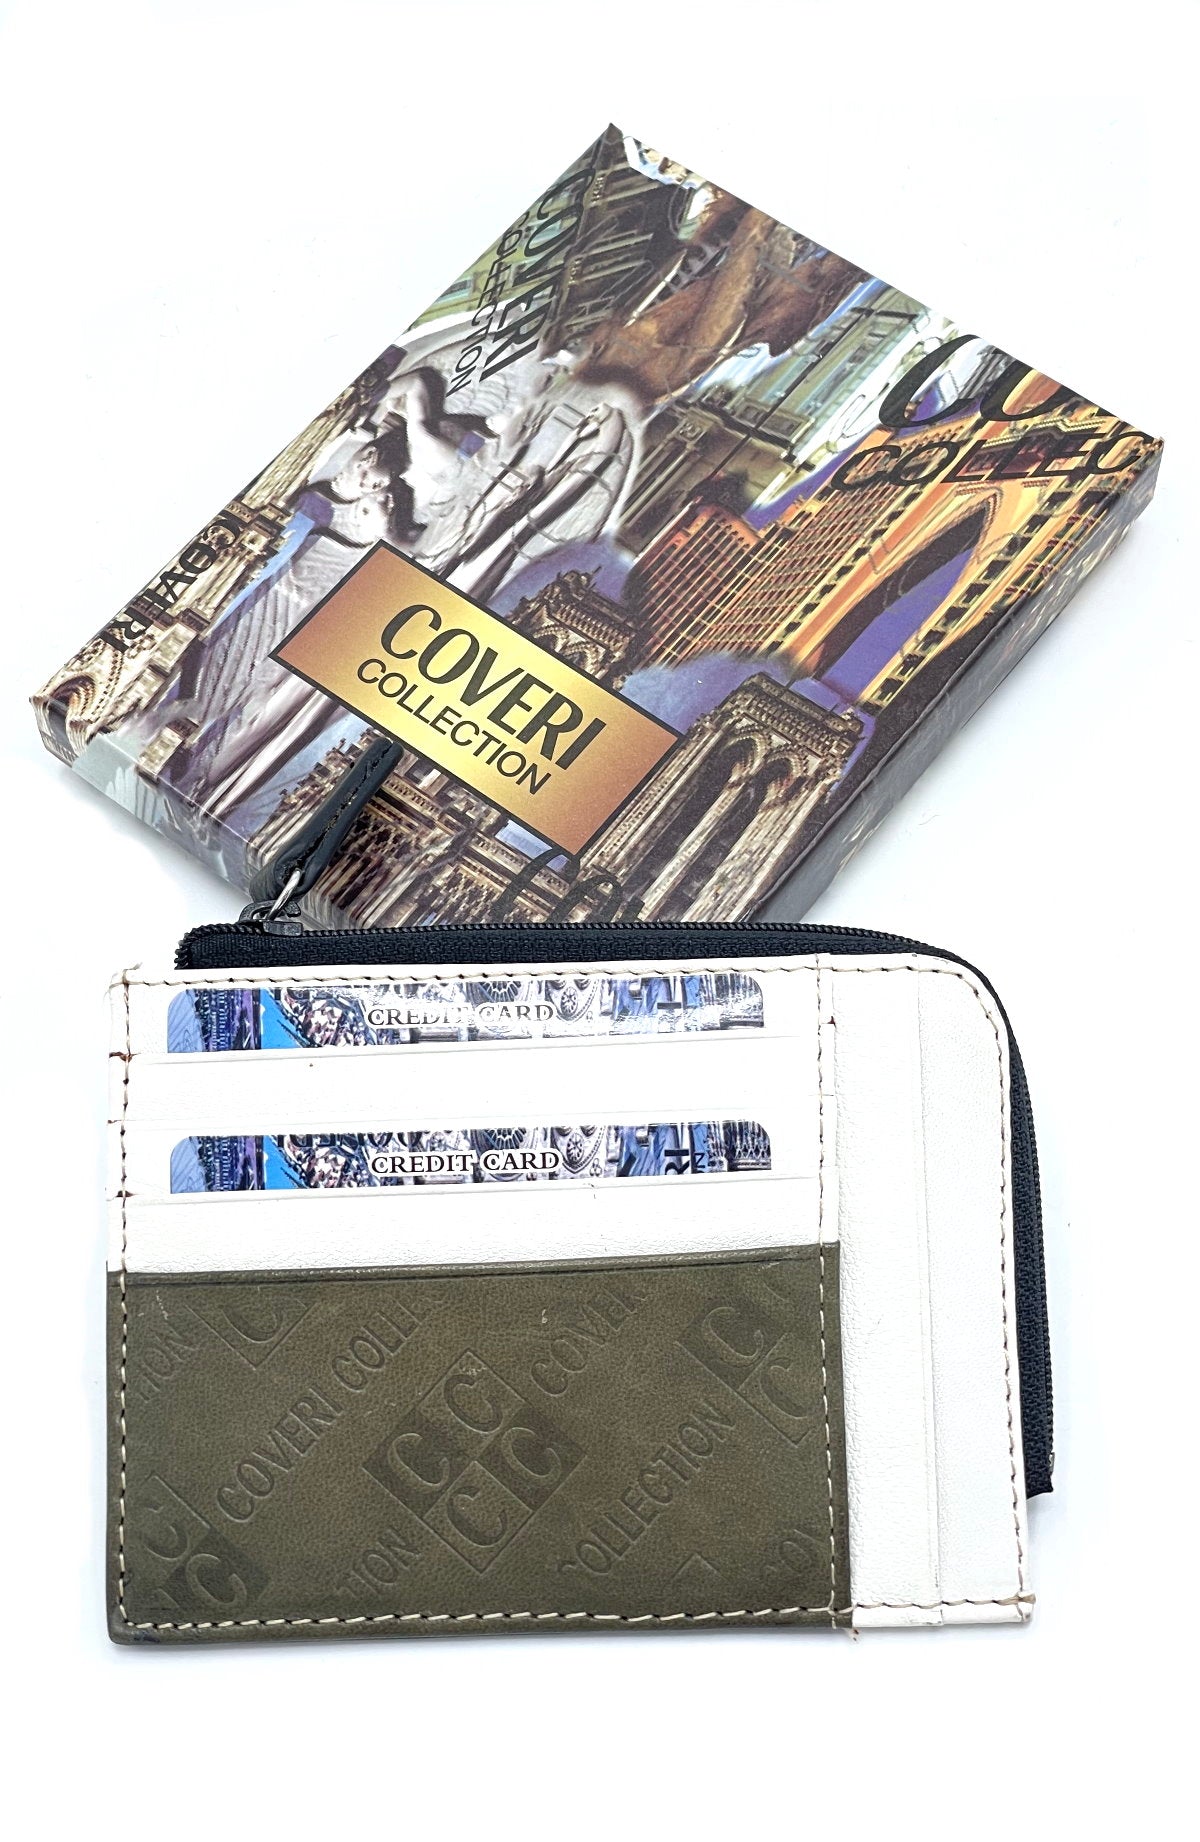 Genuine leather card holder for men, brand Coveri Collection, art. 517471.335